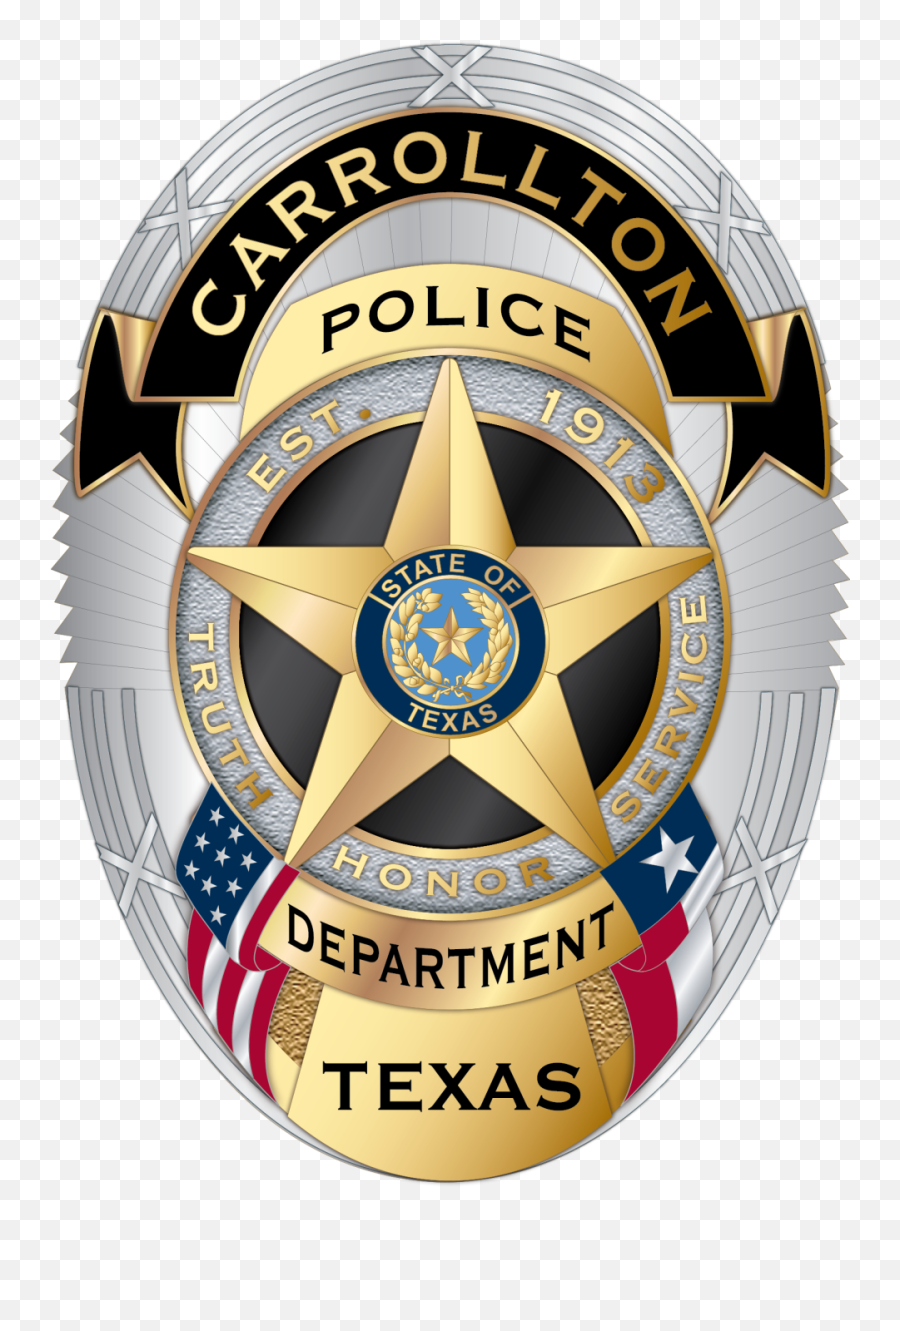 Police Badge Png - Carrollton Police Department Badge Emoji,Police Badge Emoji